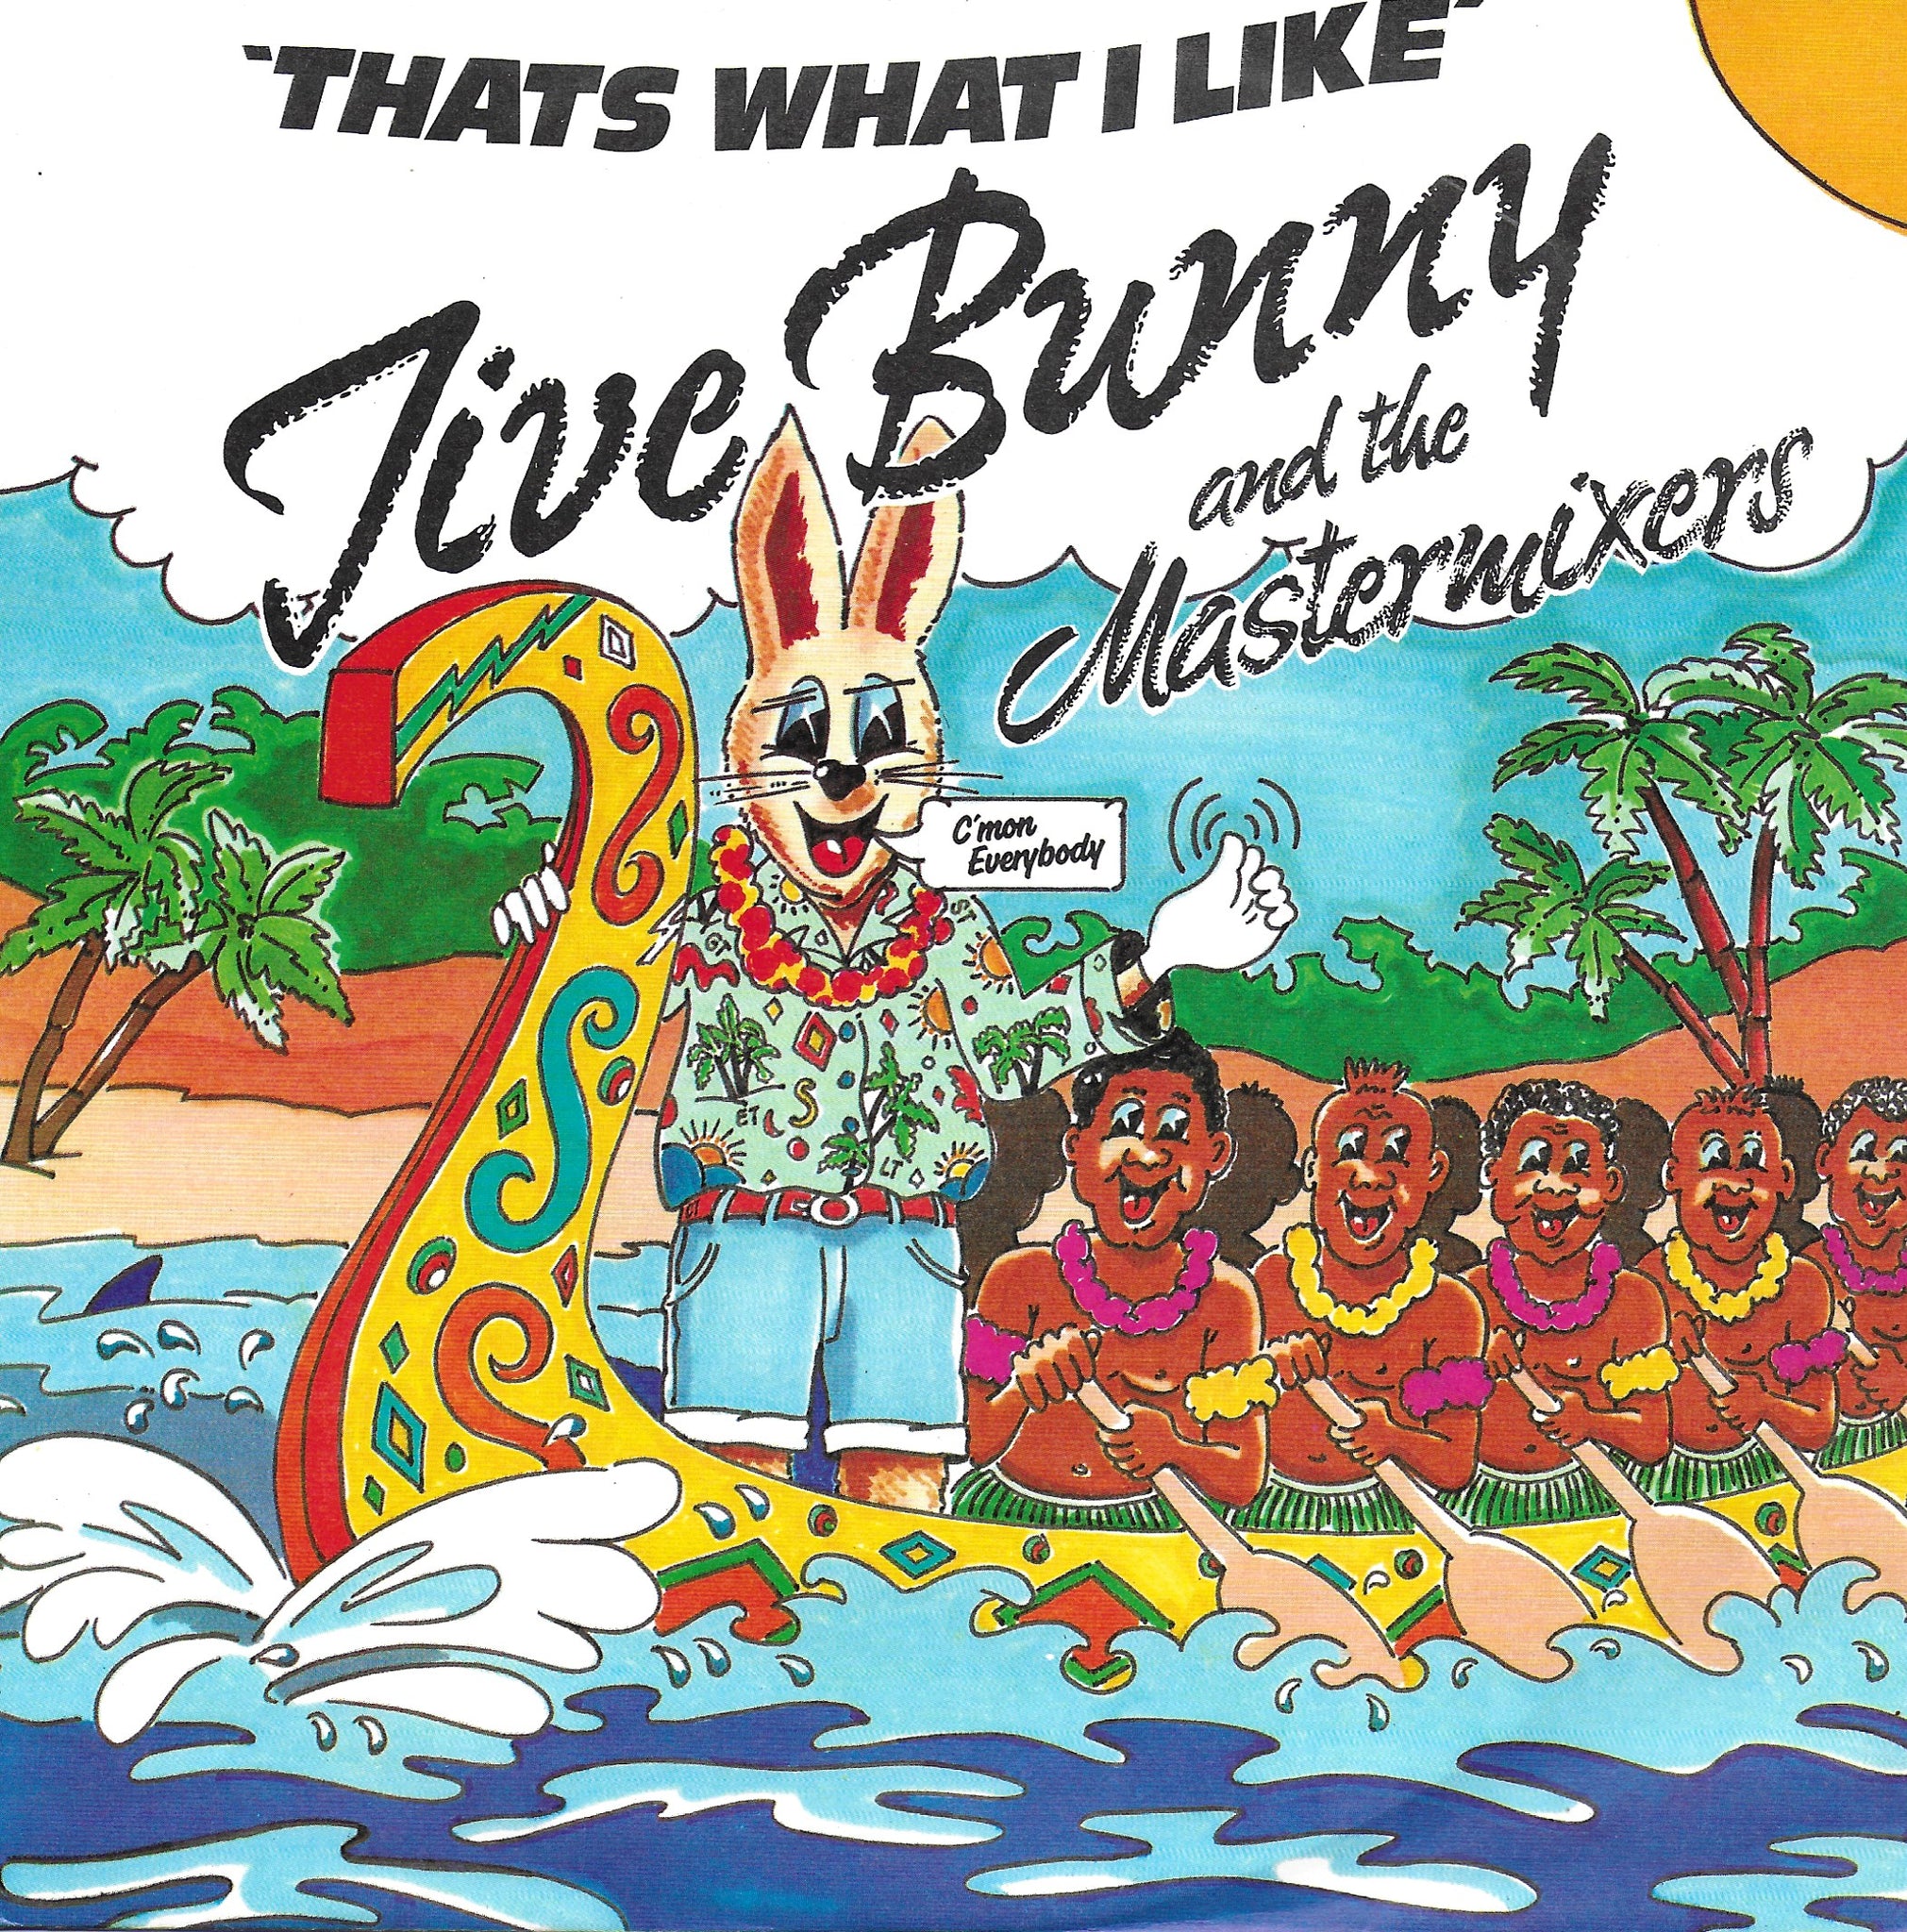 Jive Bunny and the Mastermixers - That's what i like (Duitse uitgave)